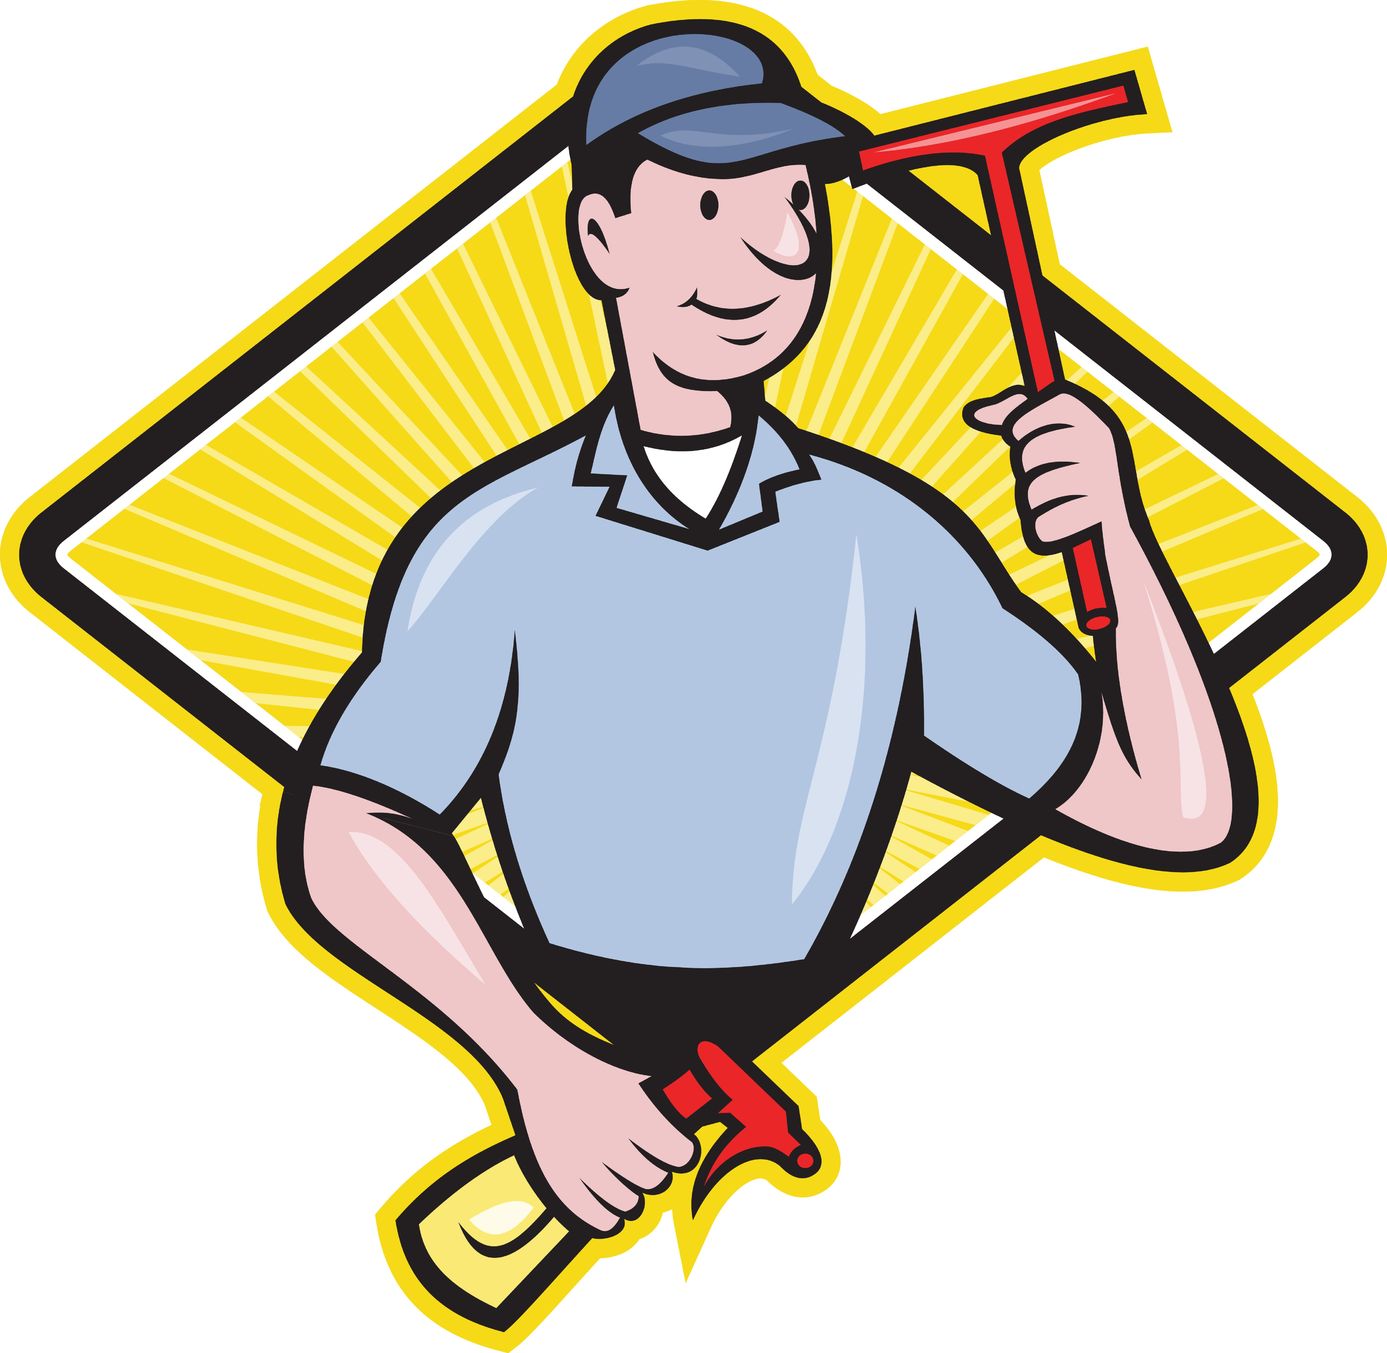 Cleaning clip art images free - Clipart Cleaning